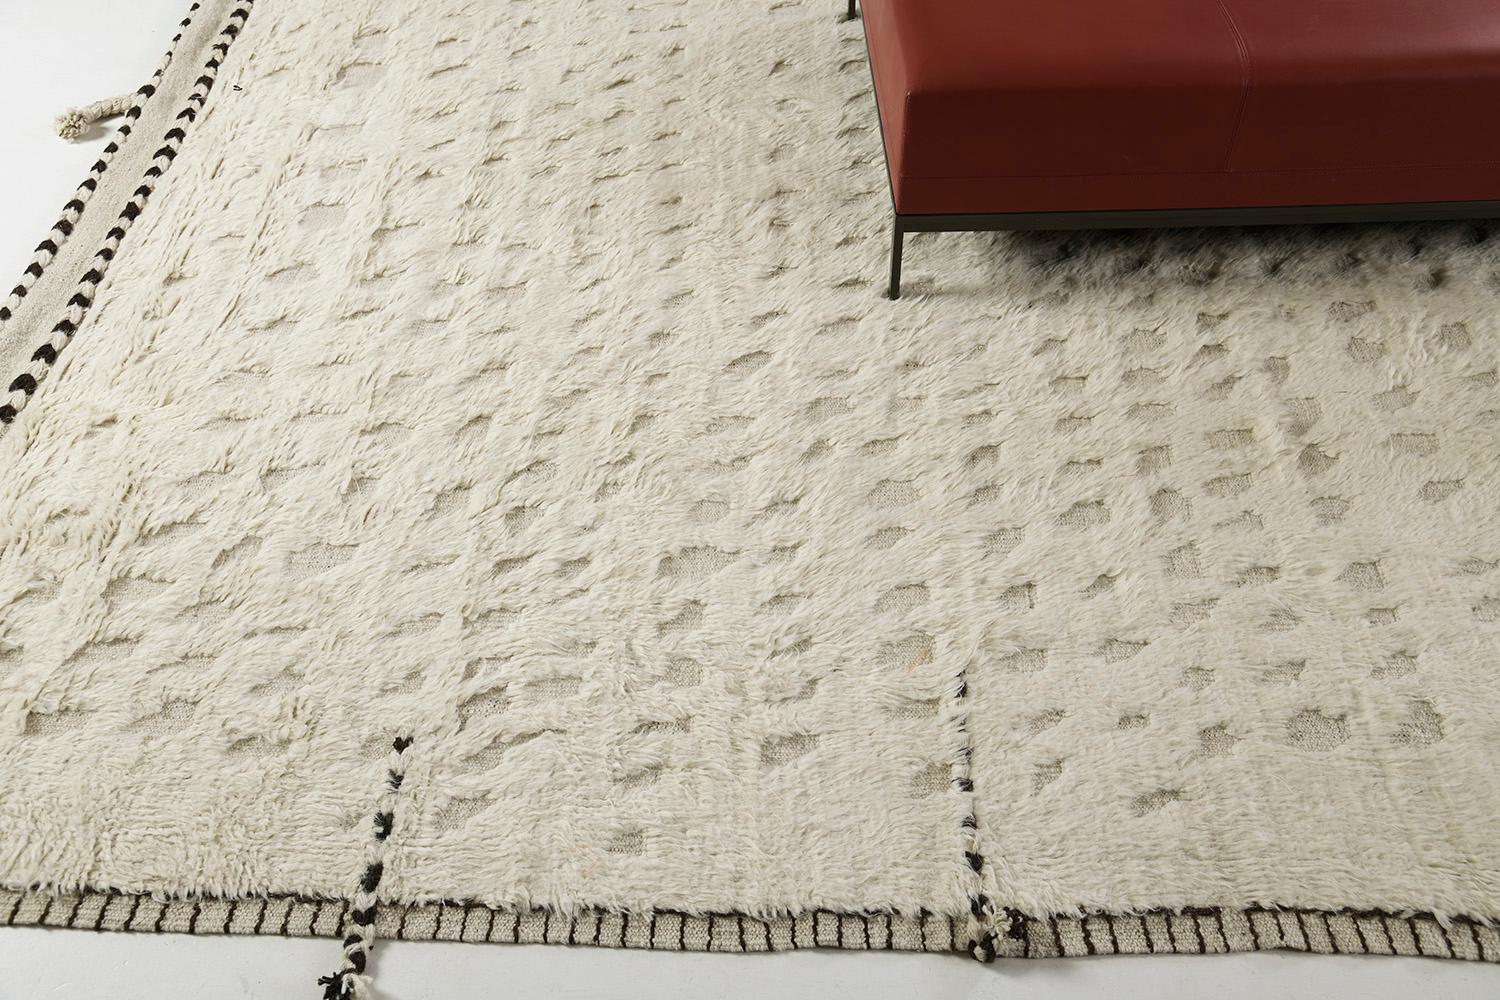 Olea' is a hand-knotted wool shag rug built on a flat-weave base. Tassel detailing run along the sides with dark stitch marks. This playful piece has a perfectly white foundation with round embossed details filling in the space and playing with the